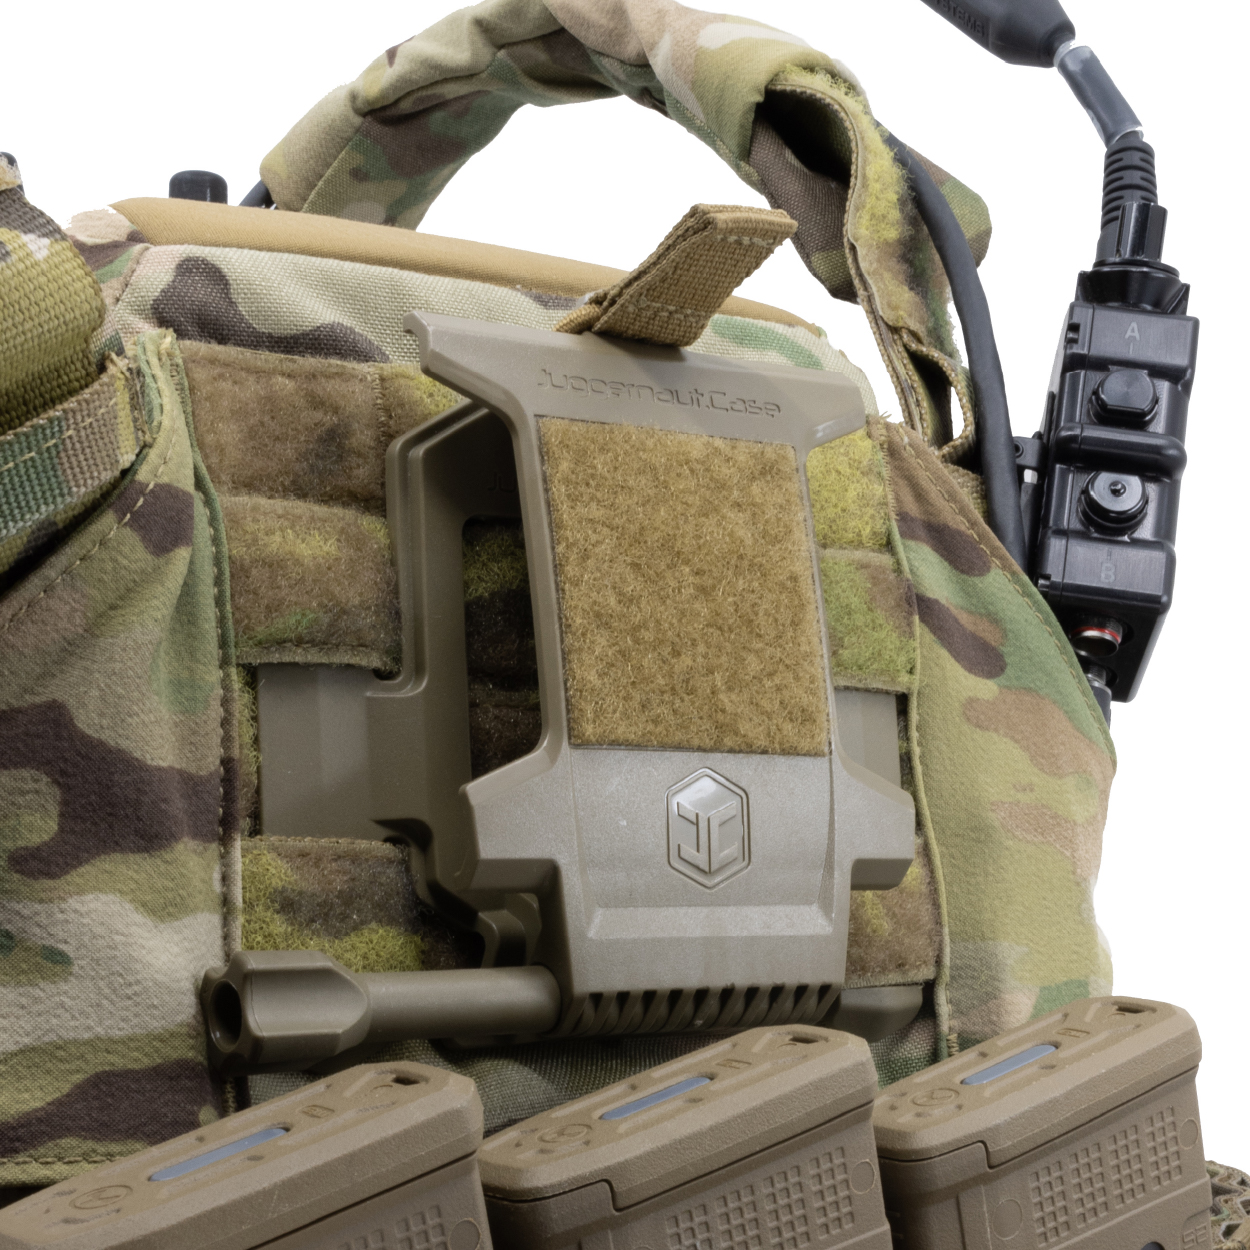 How to Attach MOLLE Webbing Accessories